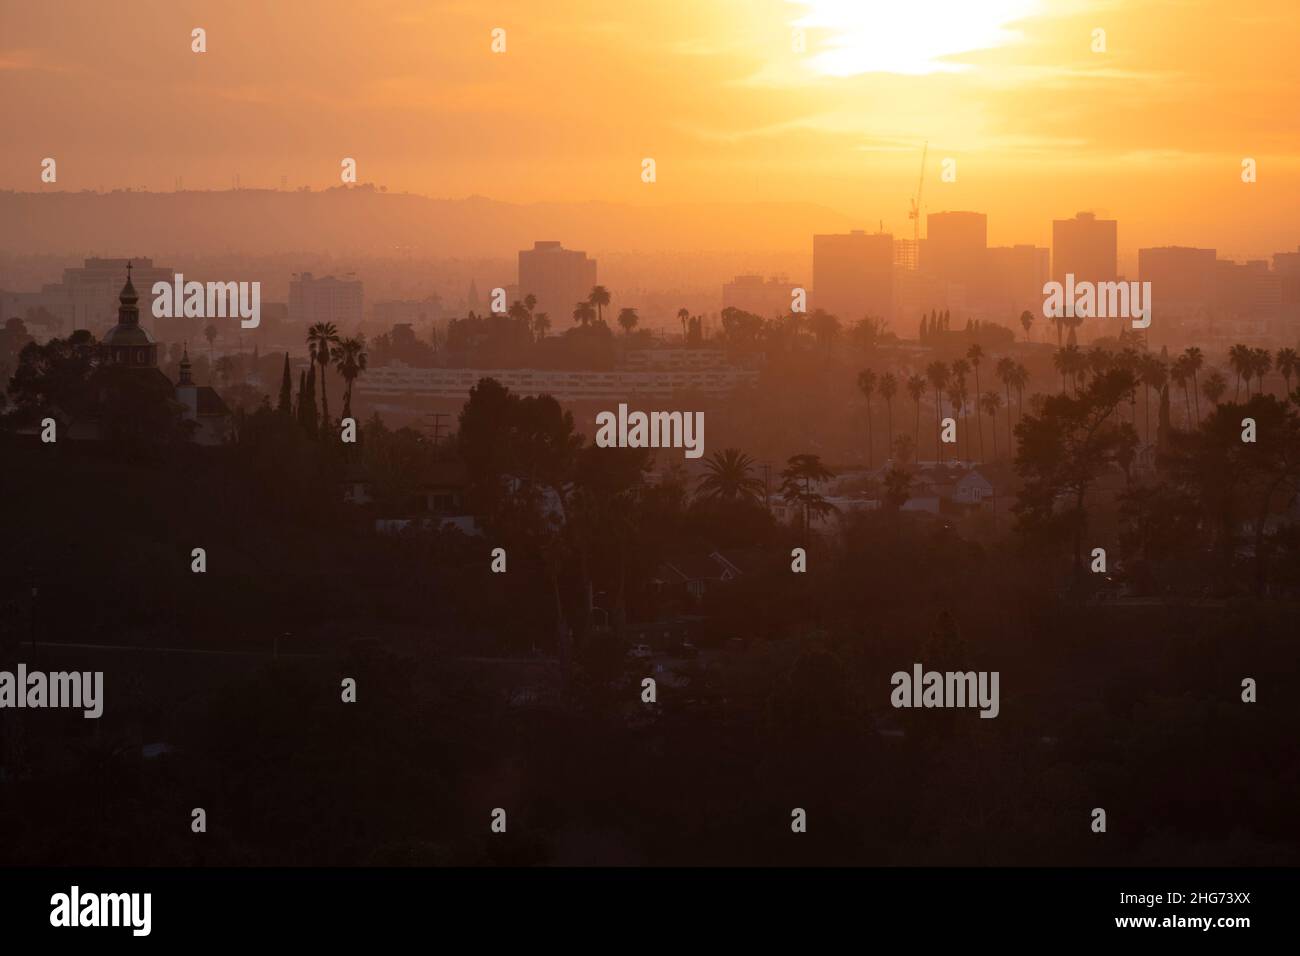 Hazy sunset over Los Angeles with palm trees and buildings Stock Photo